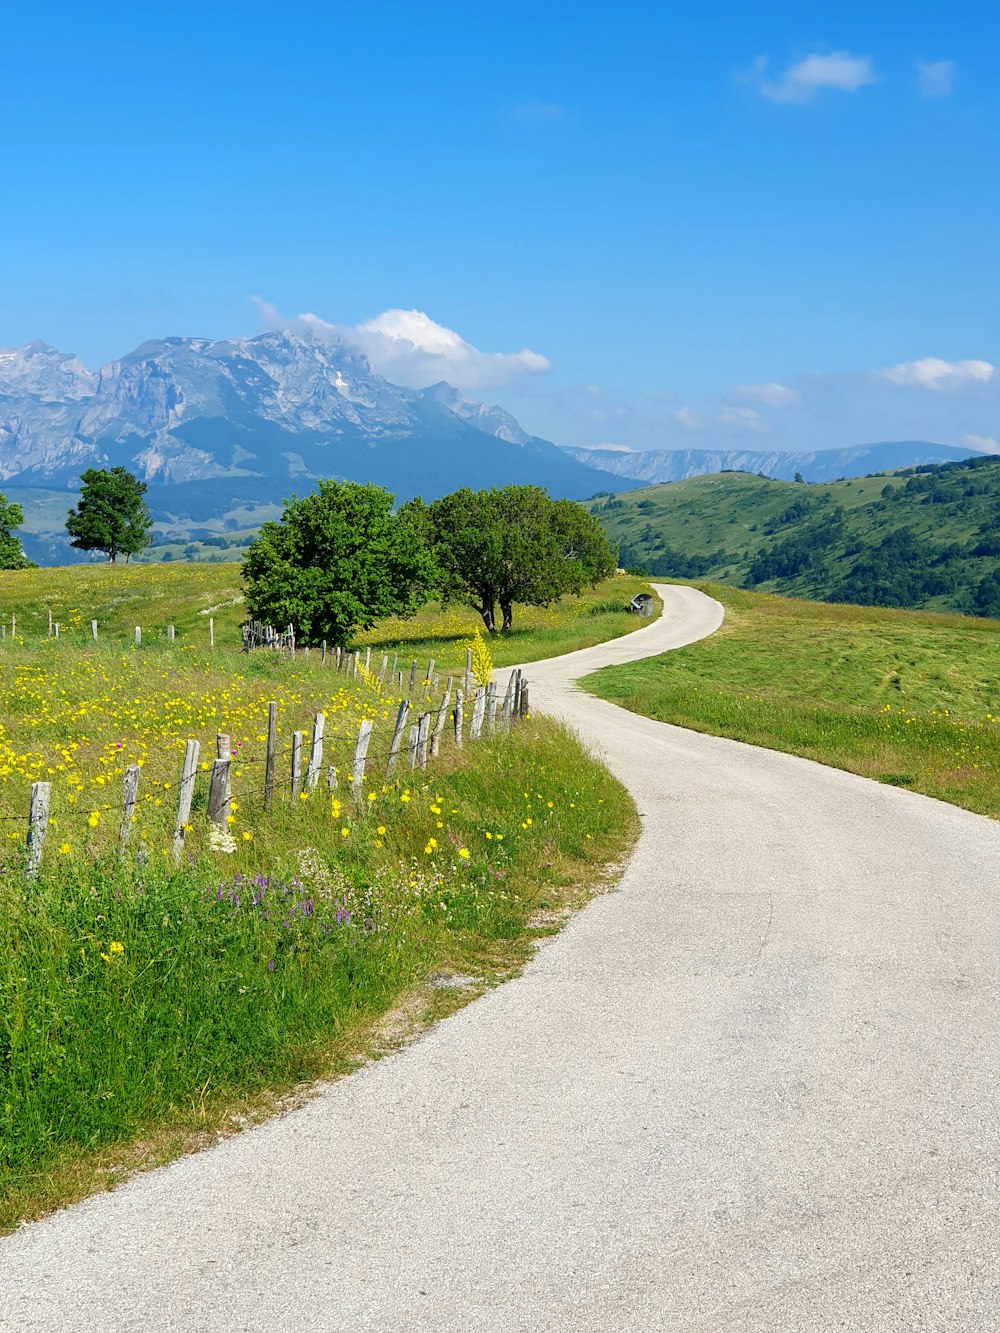 a country road winding through a field with mountains in the background